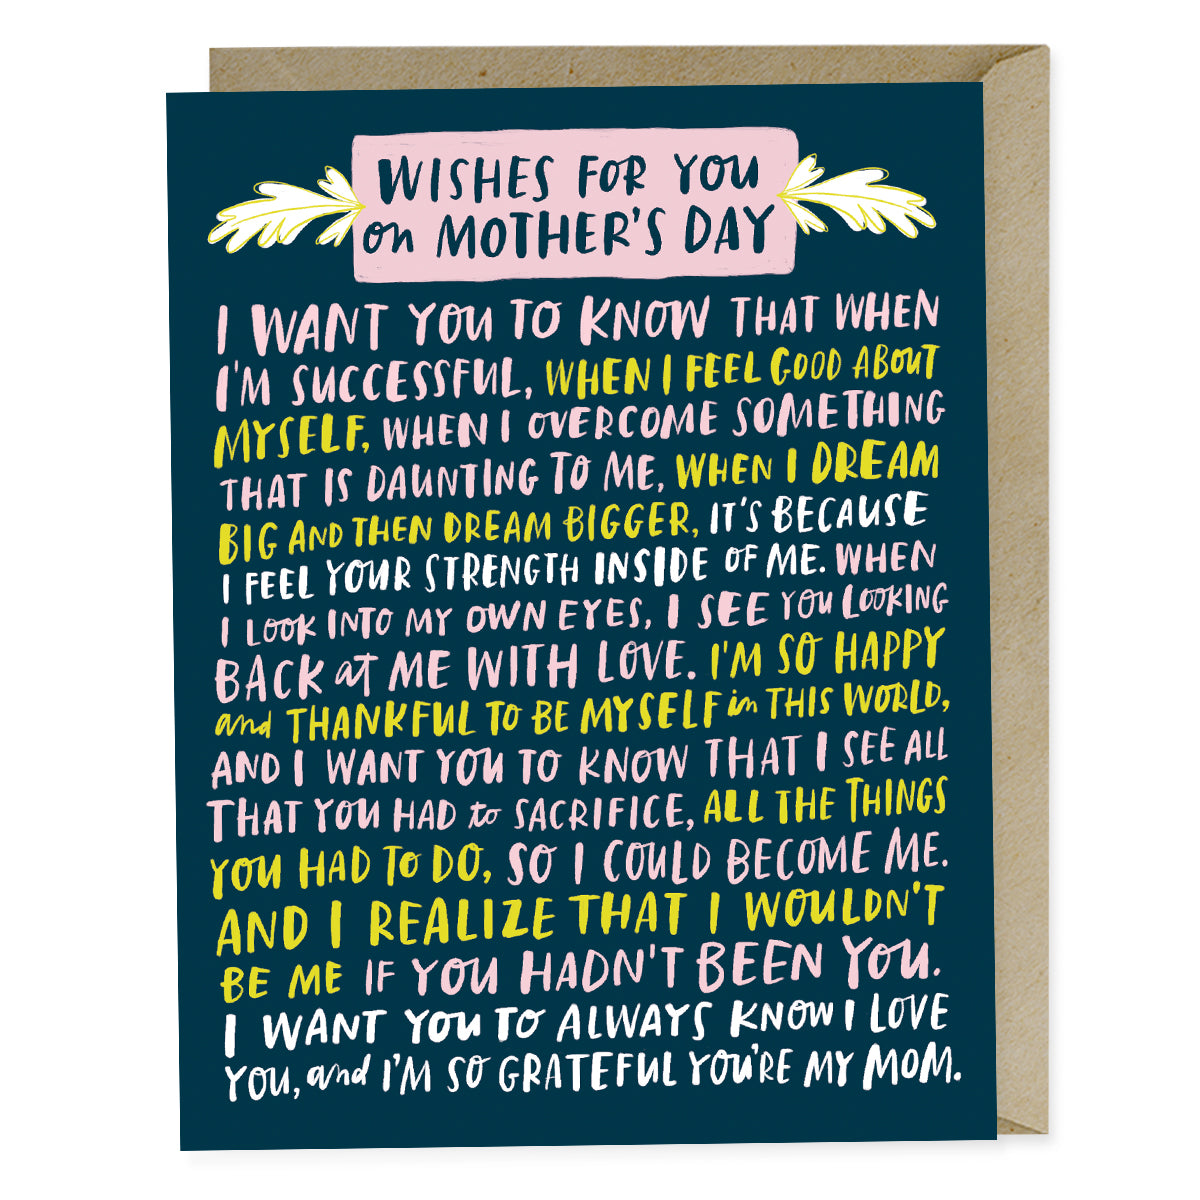 Wishes for Mom on Mother's Day Card